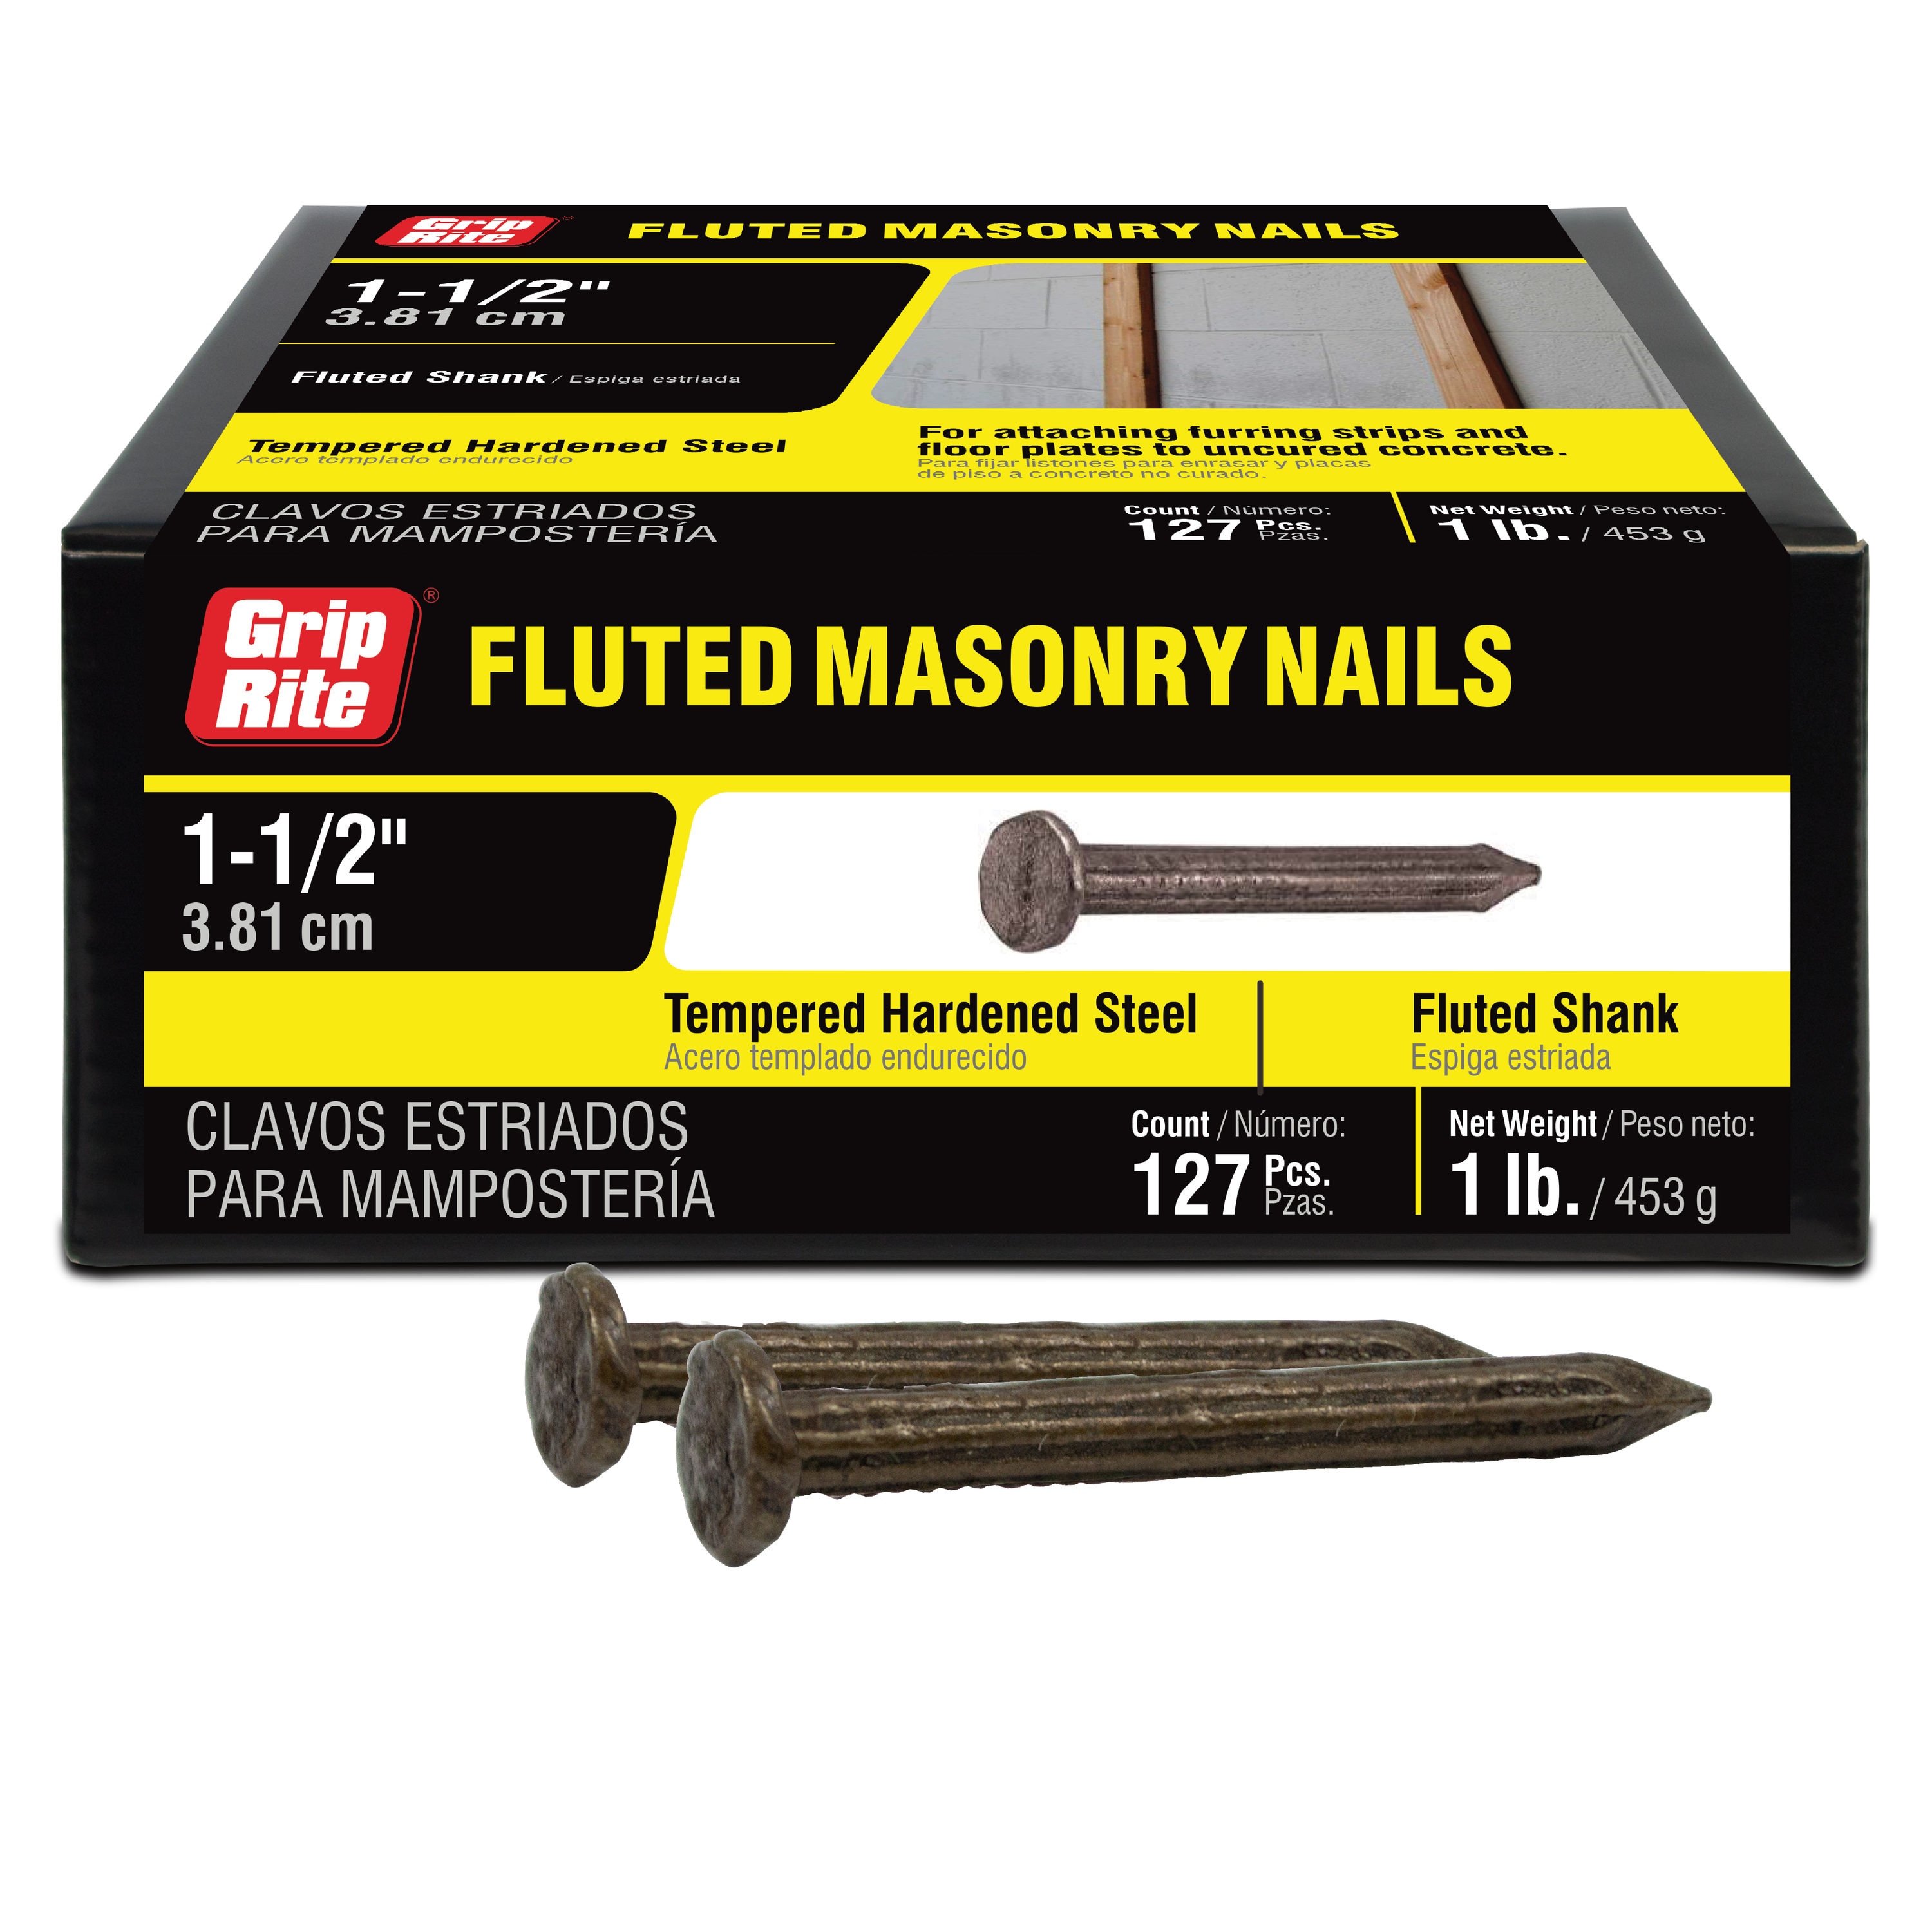 Metabo HPT 1-3/4-in Nails (3600-Per Box) at Lowes.com